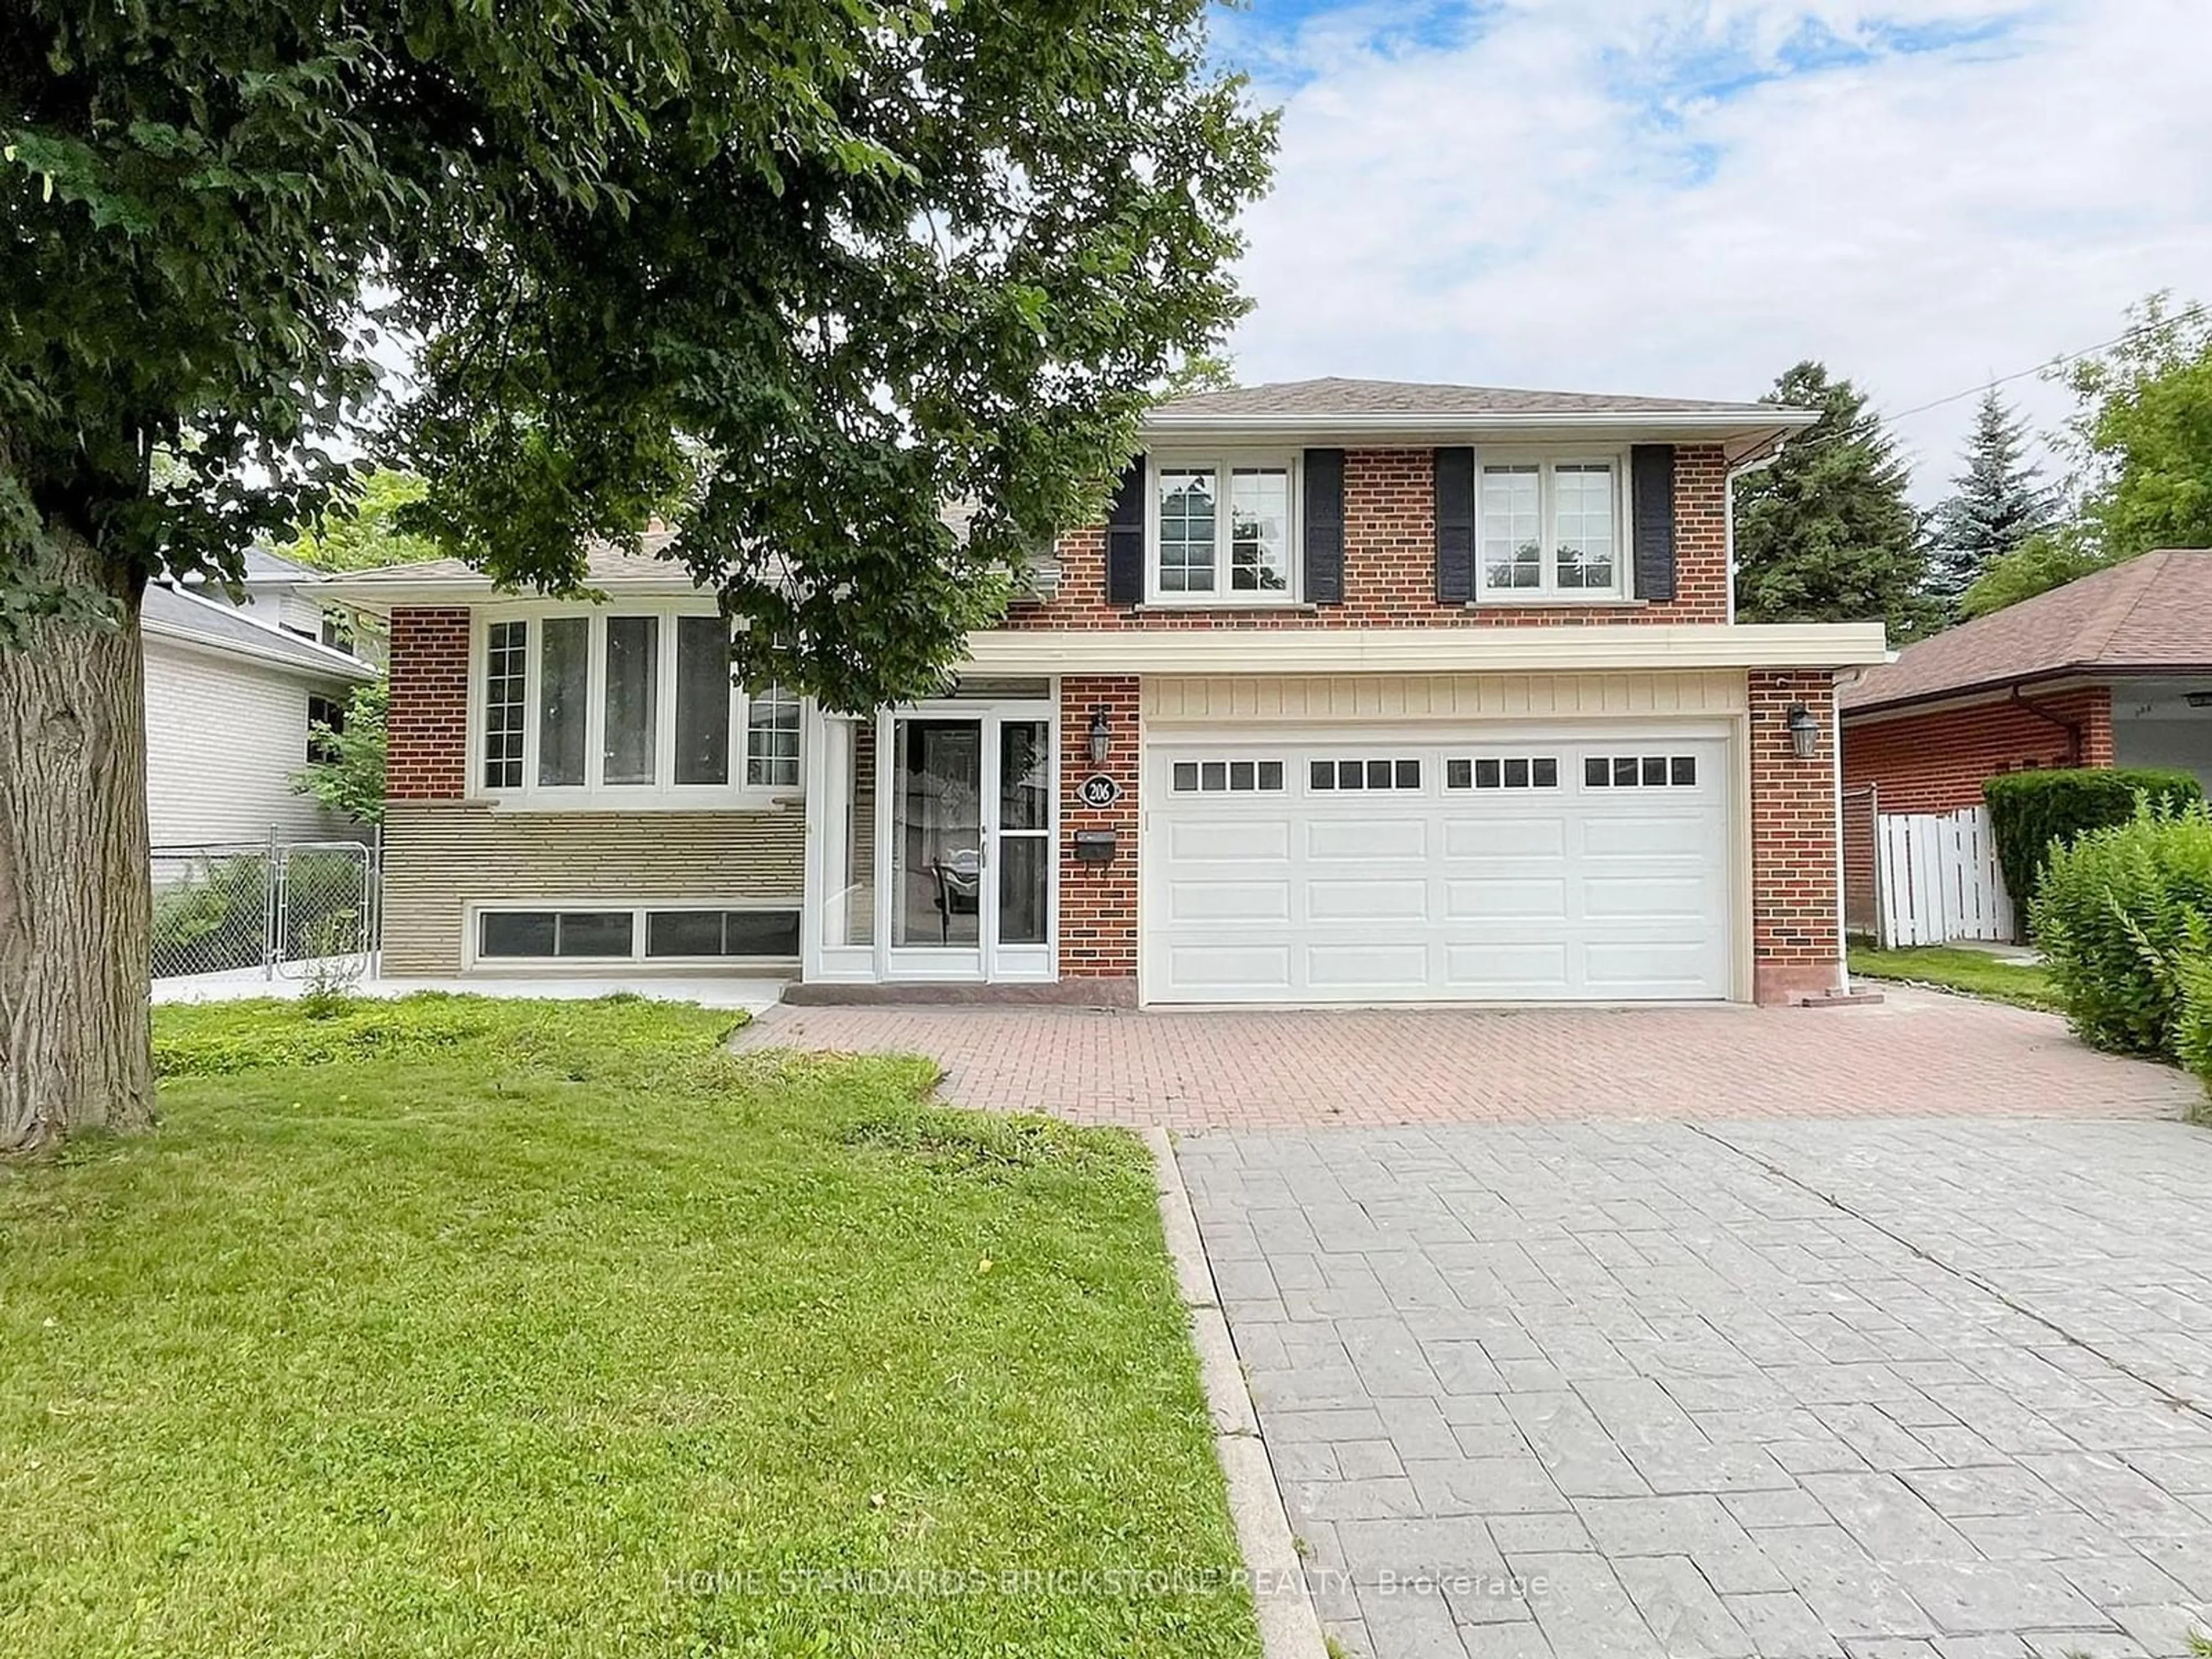 Home with brick exterior material for 206 Henderson Ave, Markham Ontario L3T 2L9